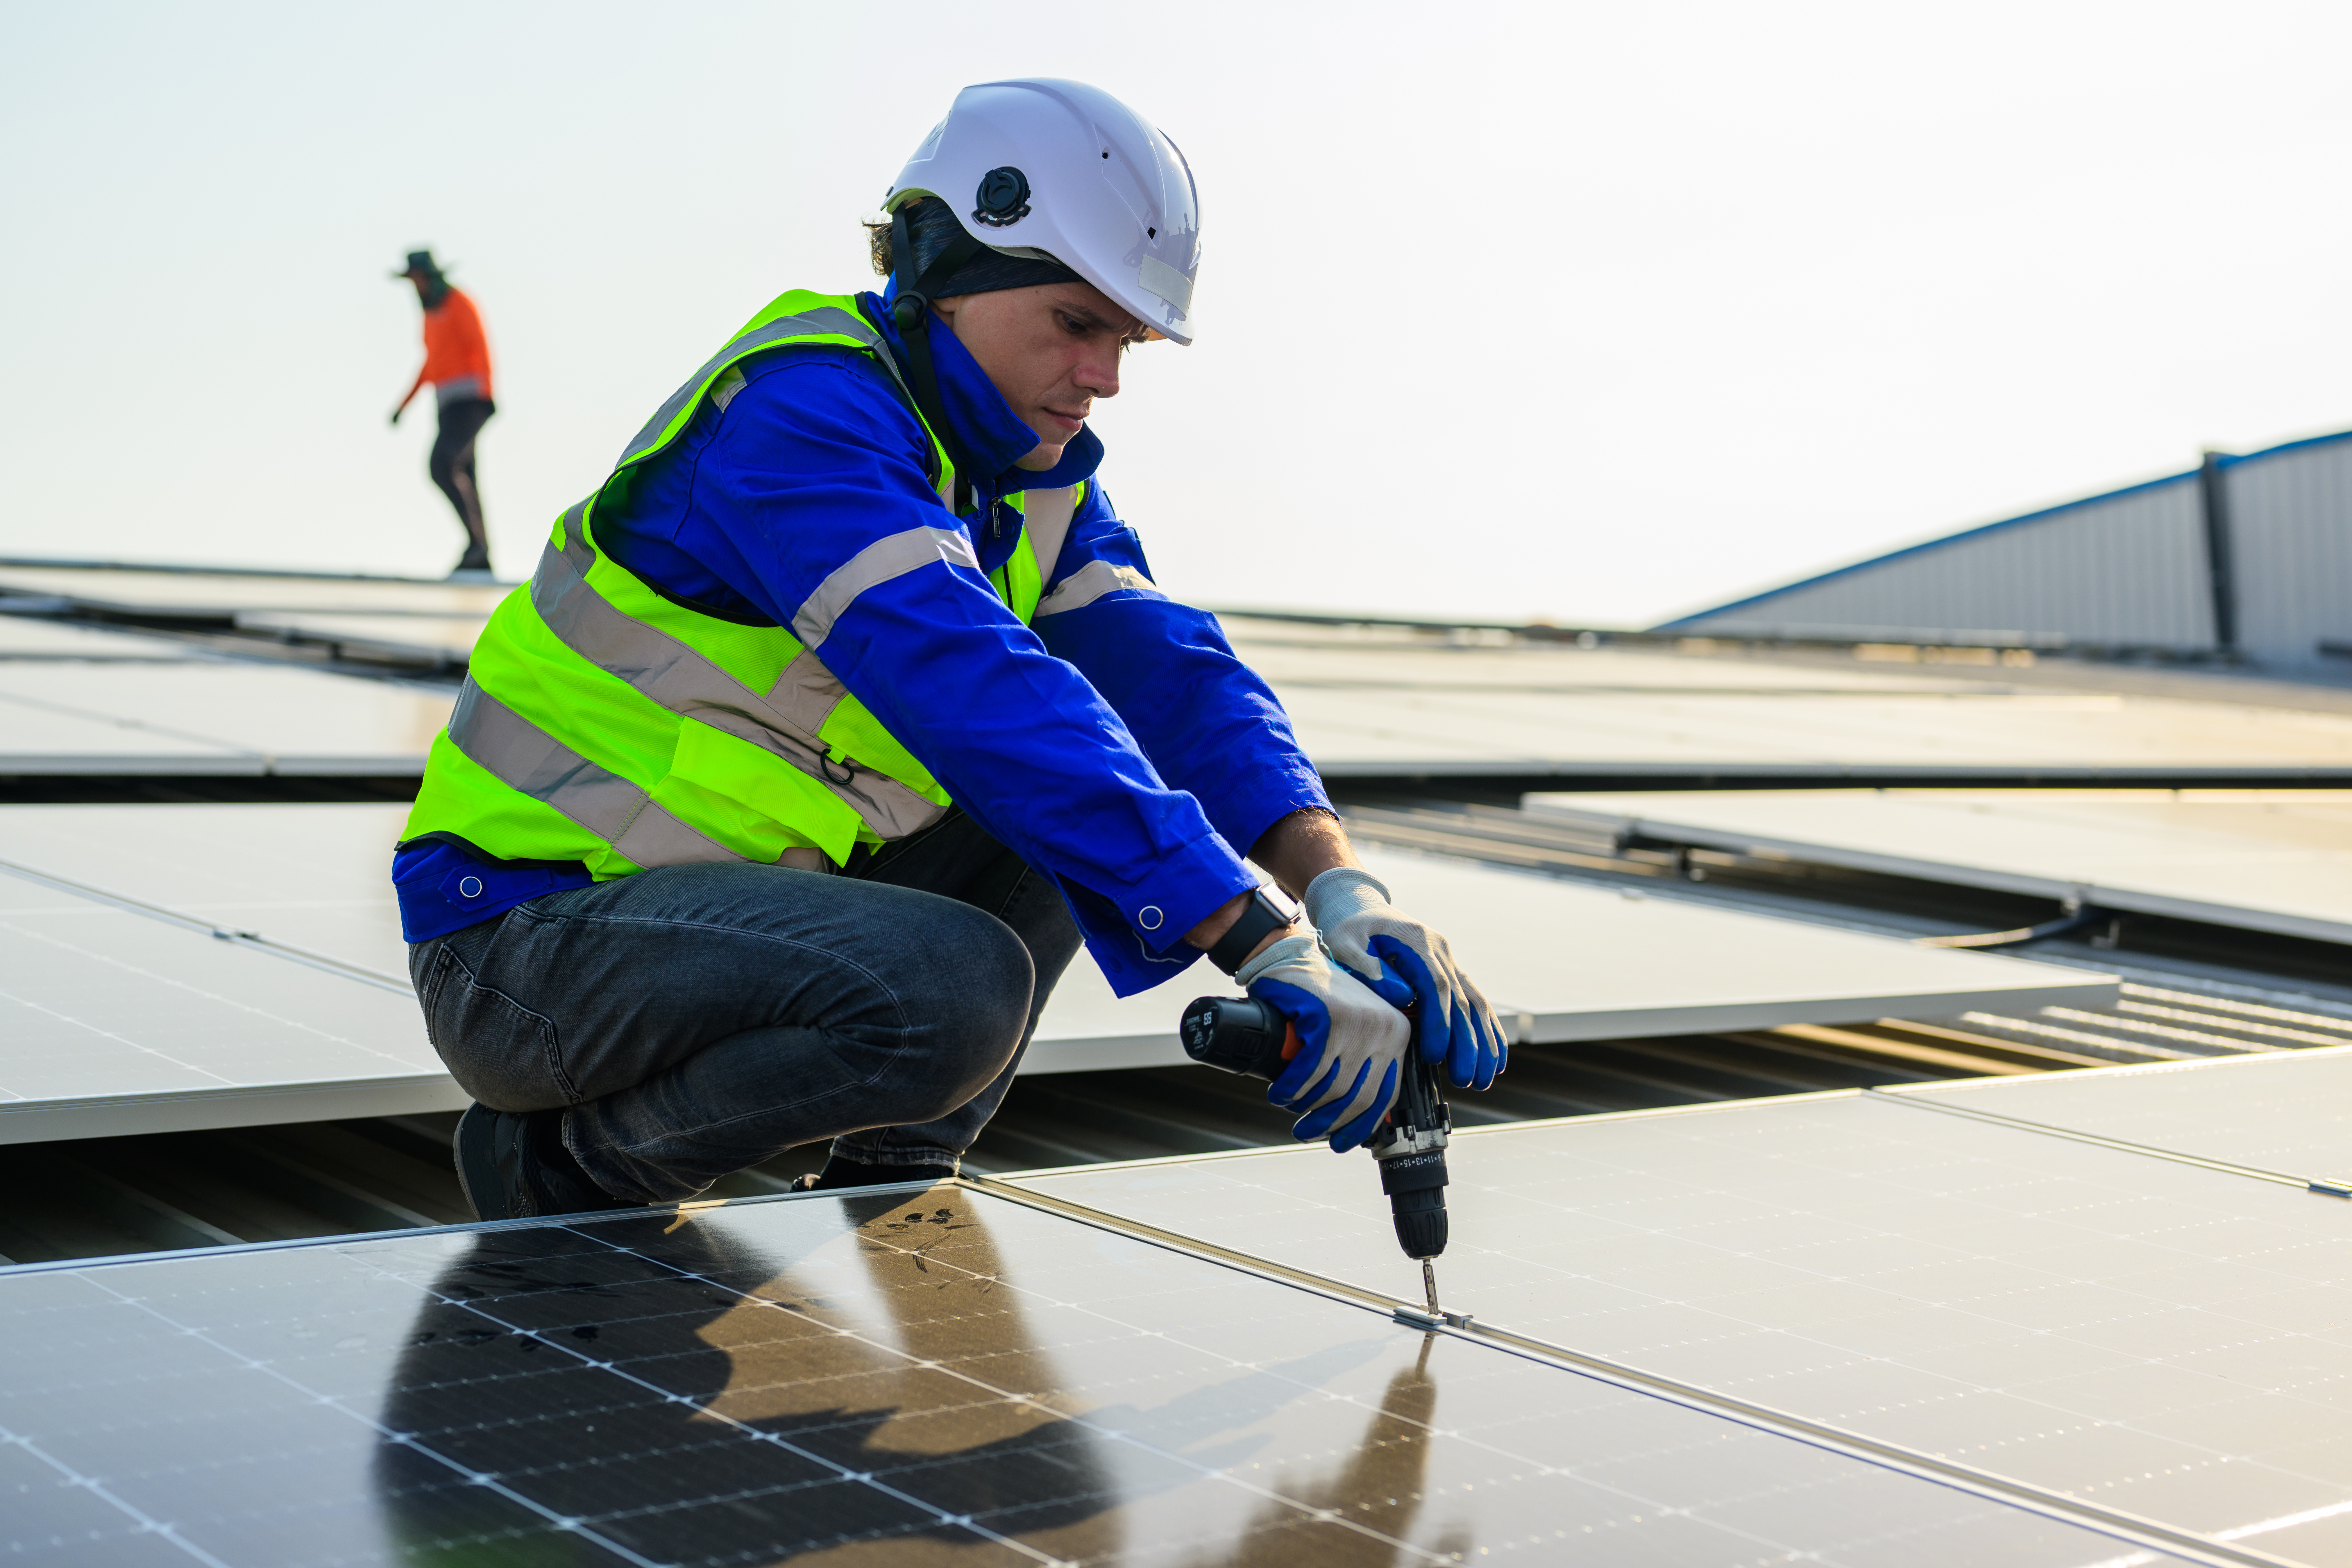 Professional technicians installing solar panels on rooftop